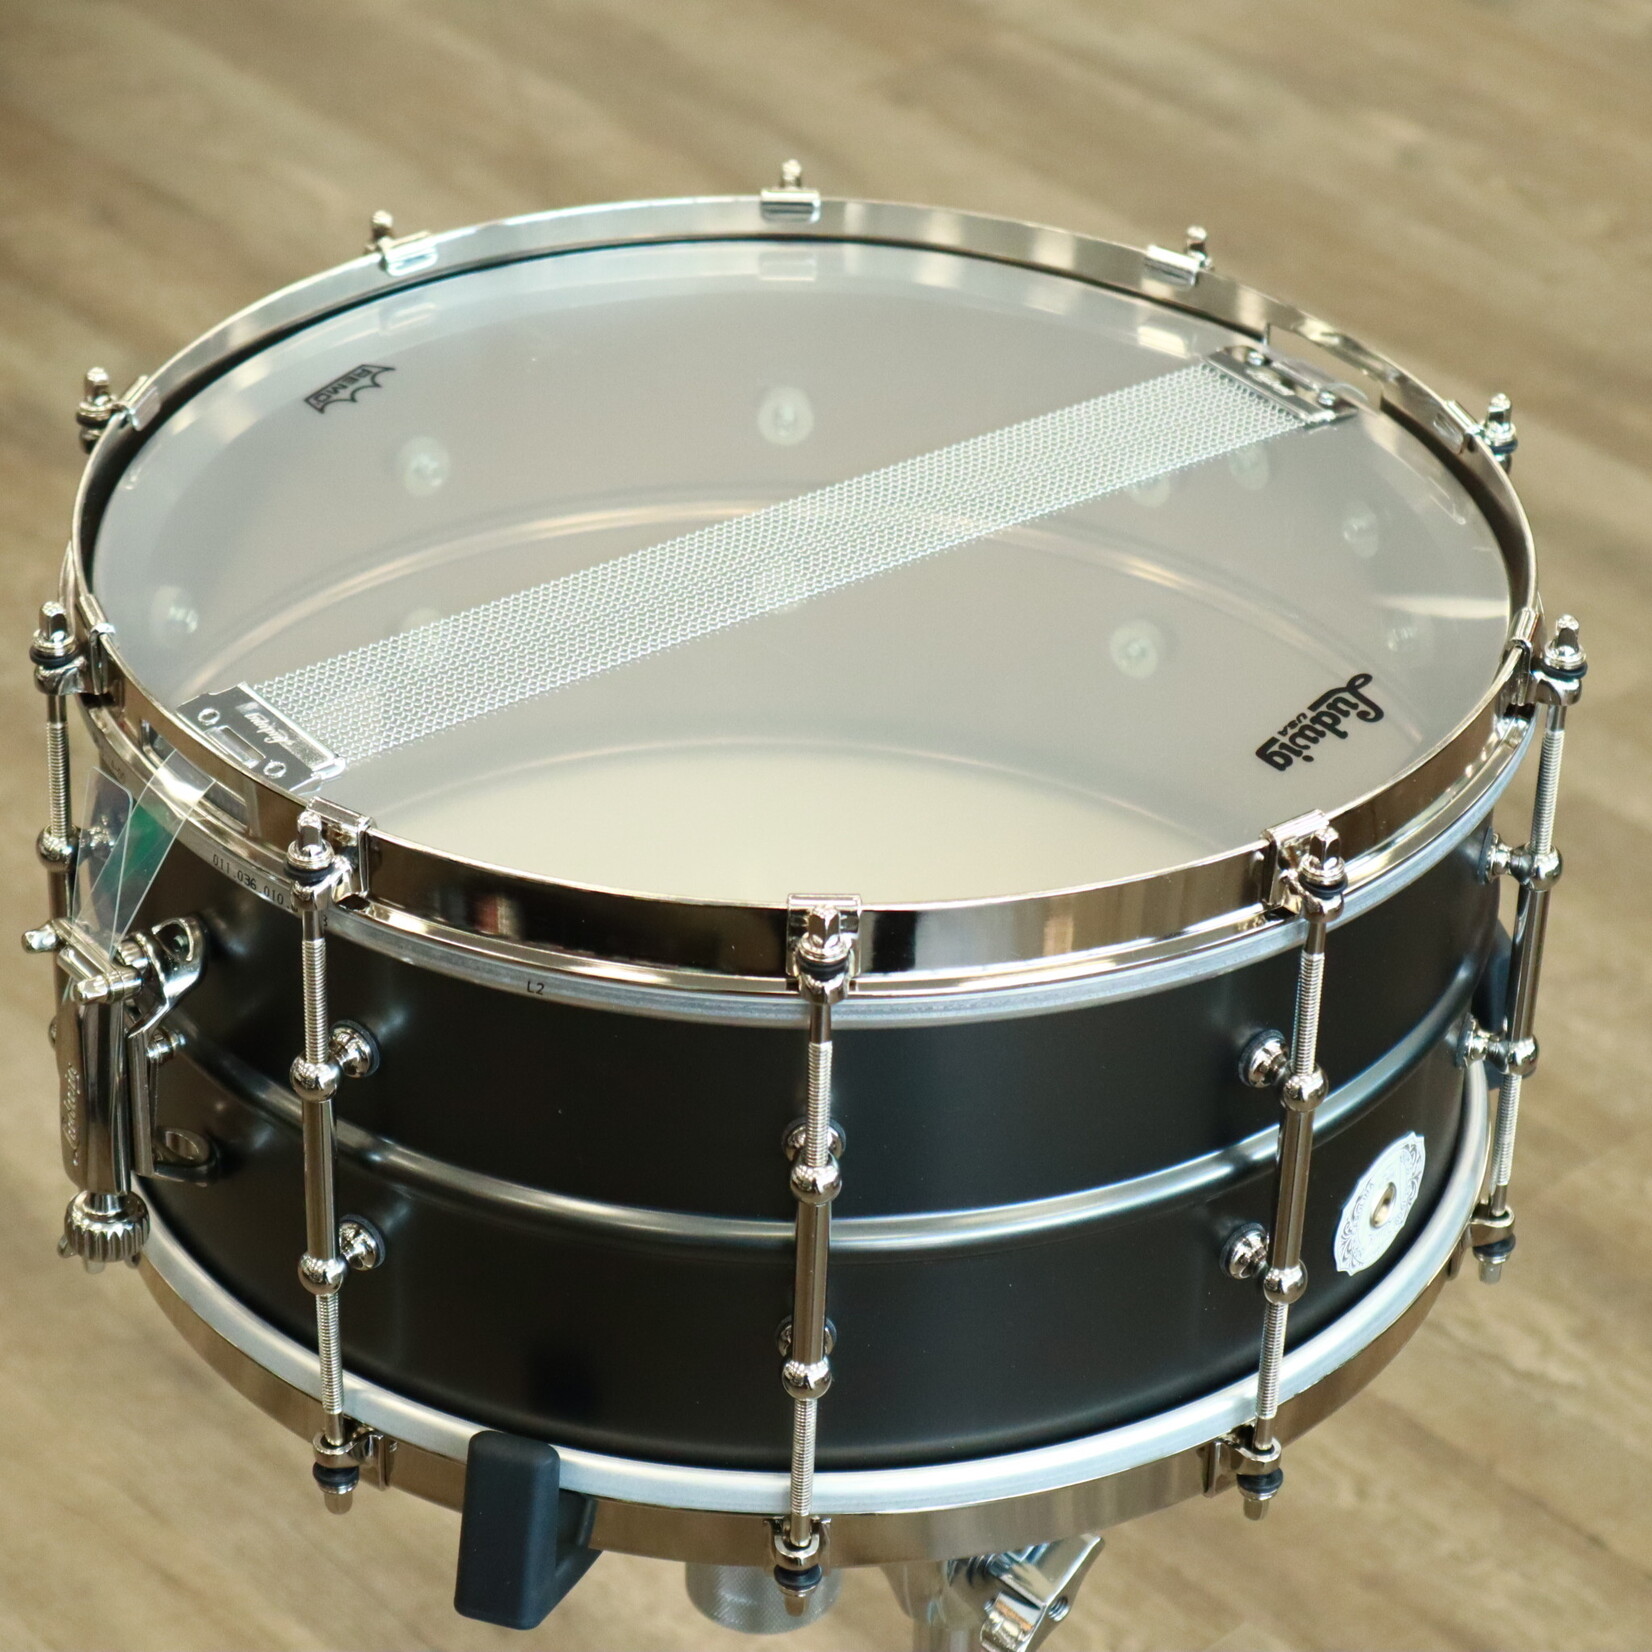 Ludwig Ludwig 6.5x14" Limited Edition "Satin De Luxe" Snare Drum (Satin Black over Brass, Tube Lugs, Single Flanged Hoop, Nickel Plated Hardware)